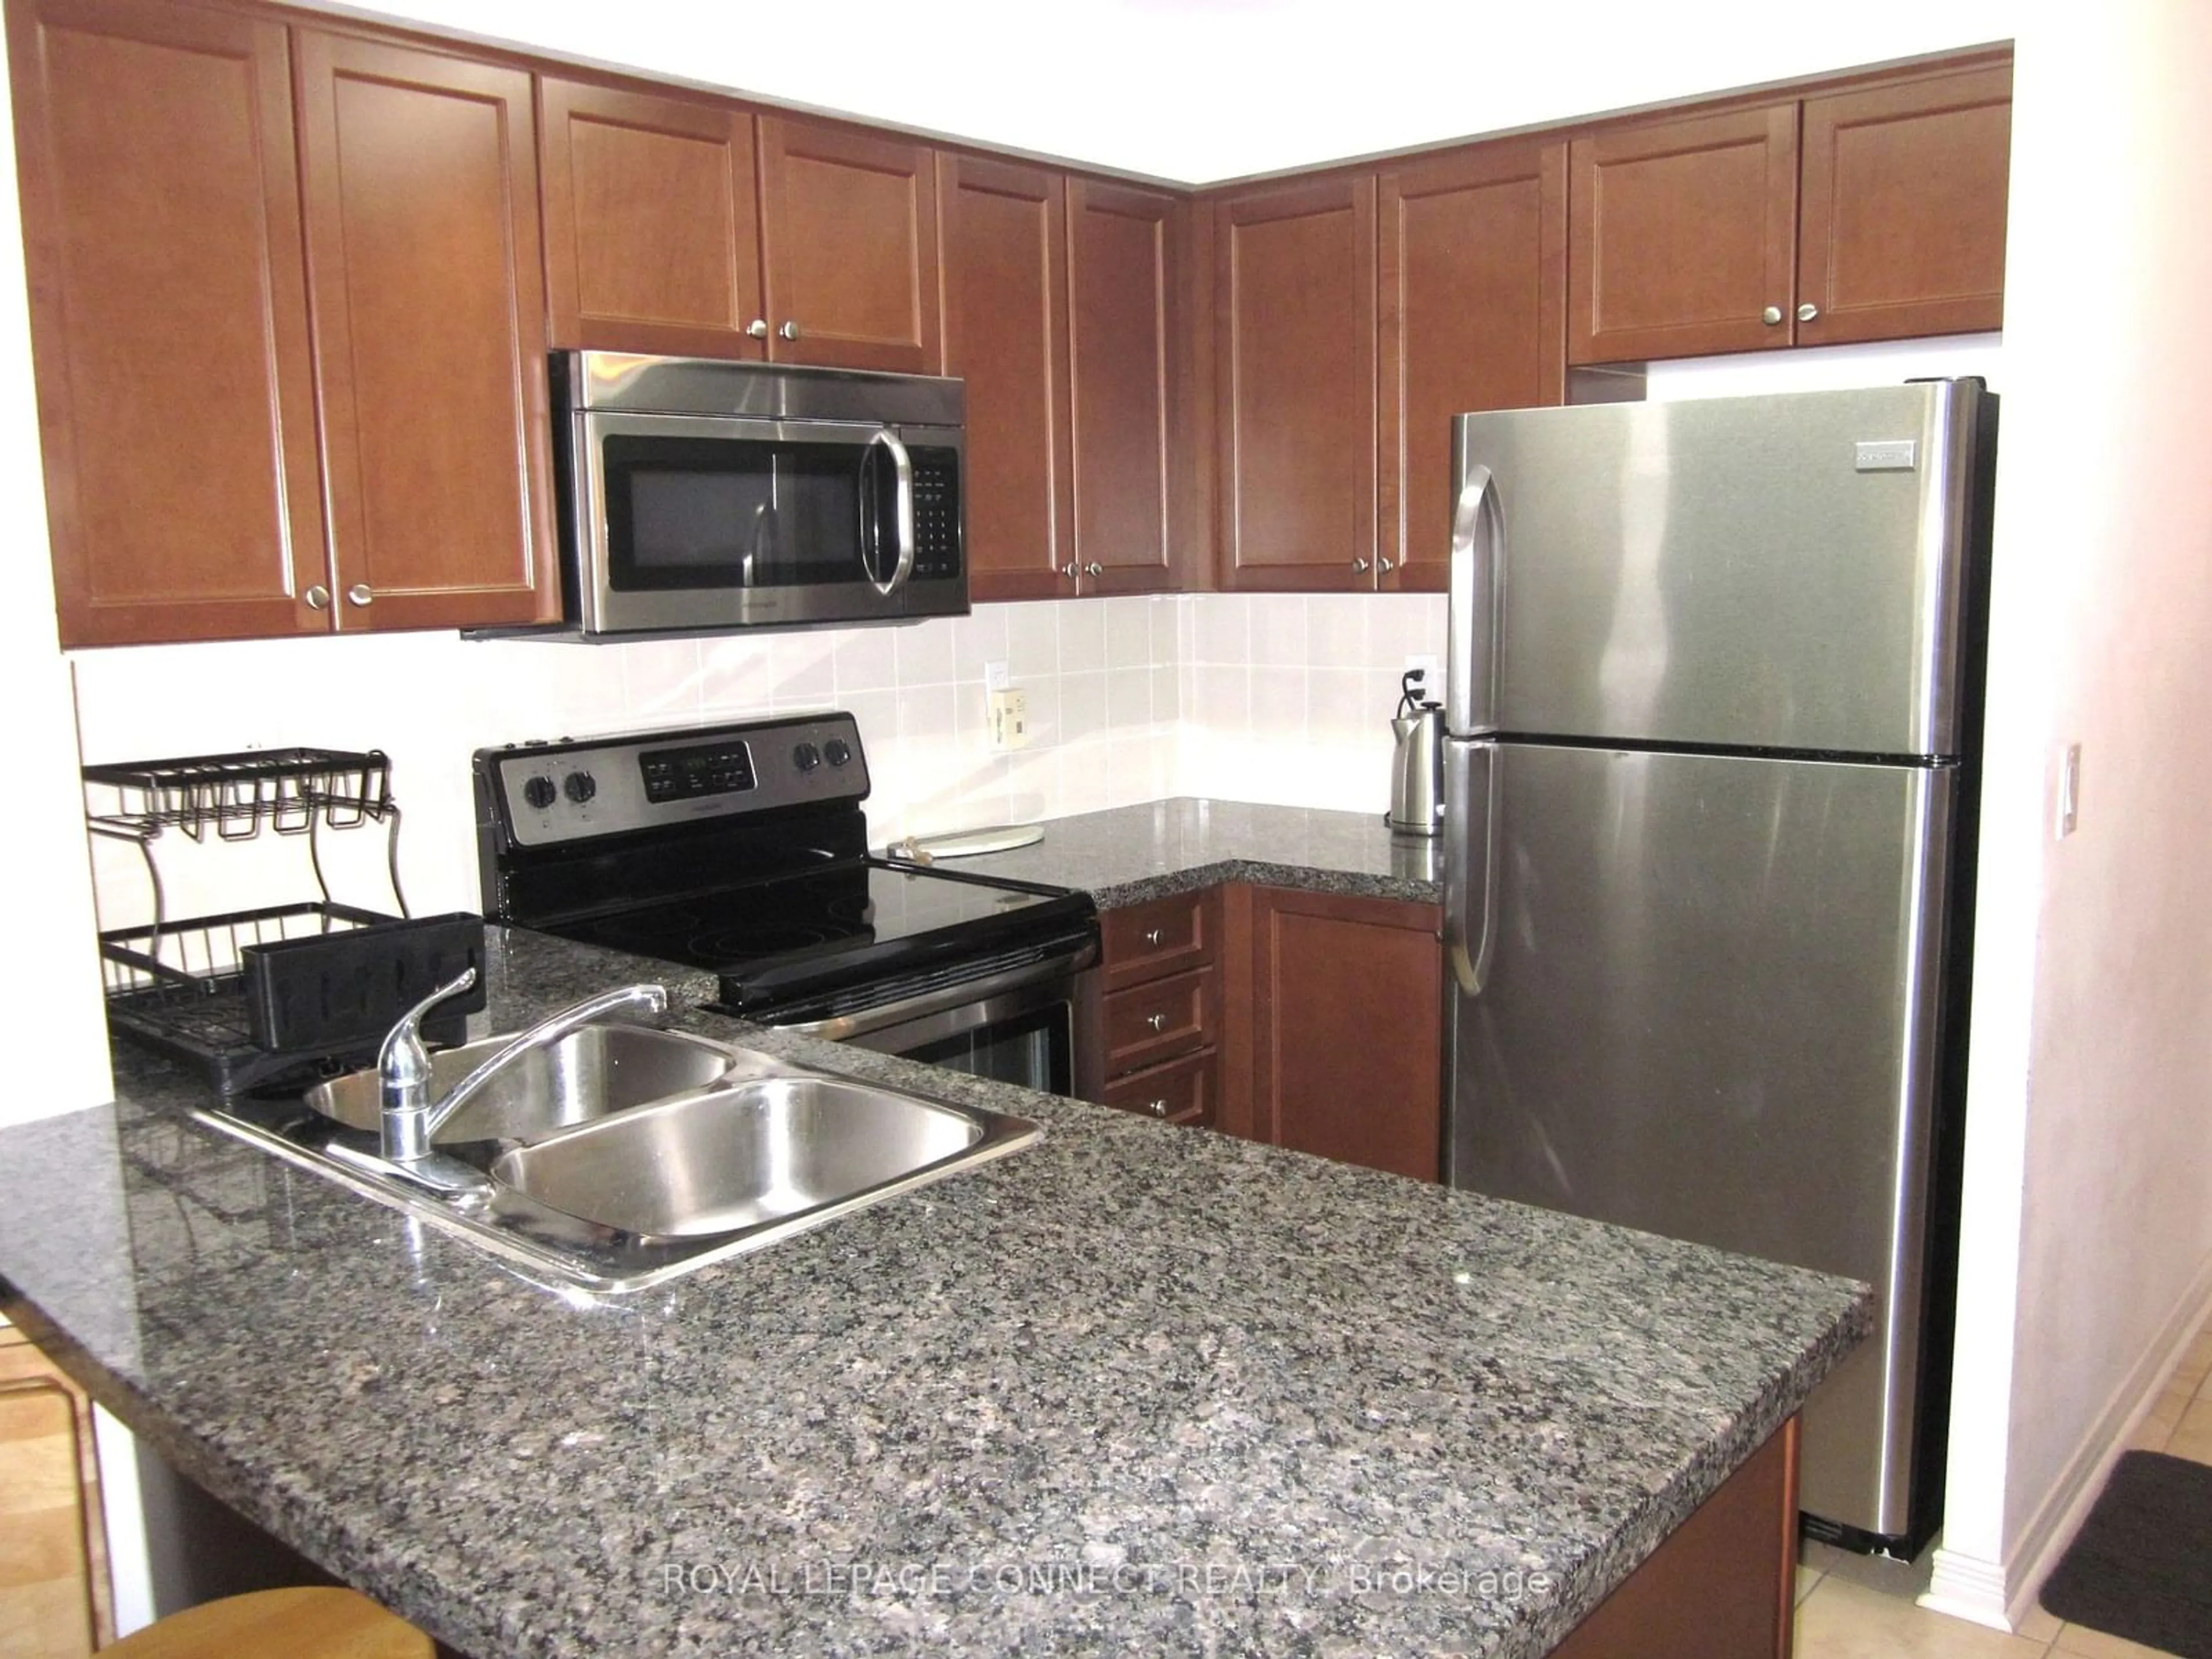 Standard kitchen for 3 Michael Power Pl #801, Toronto Ontario M9A 0A2